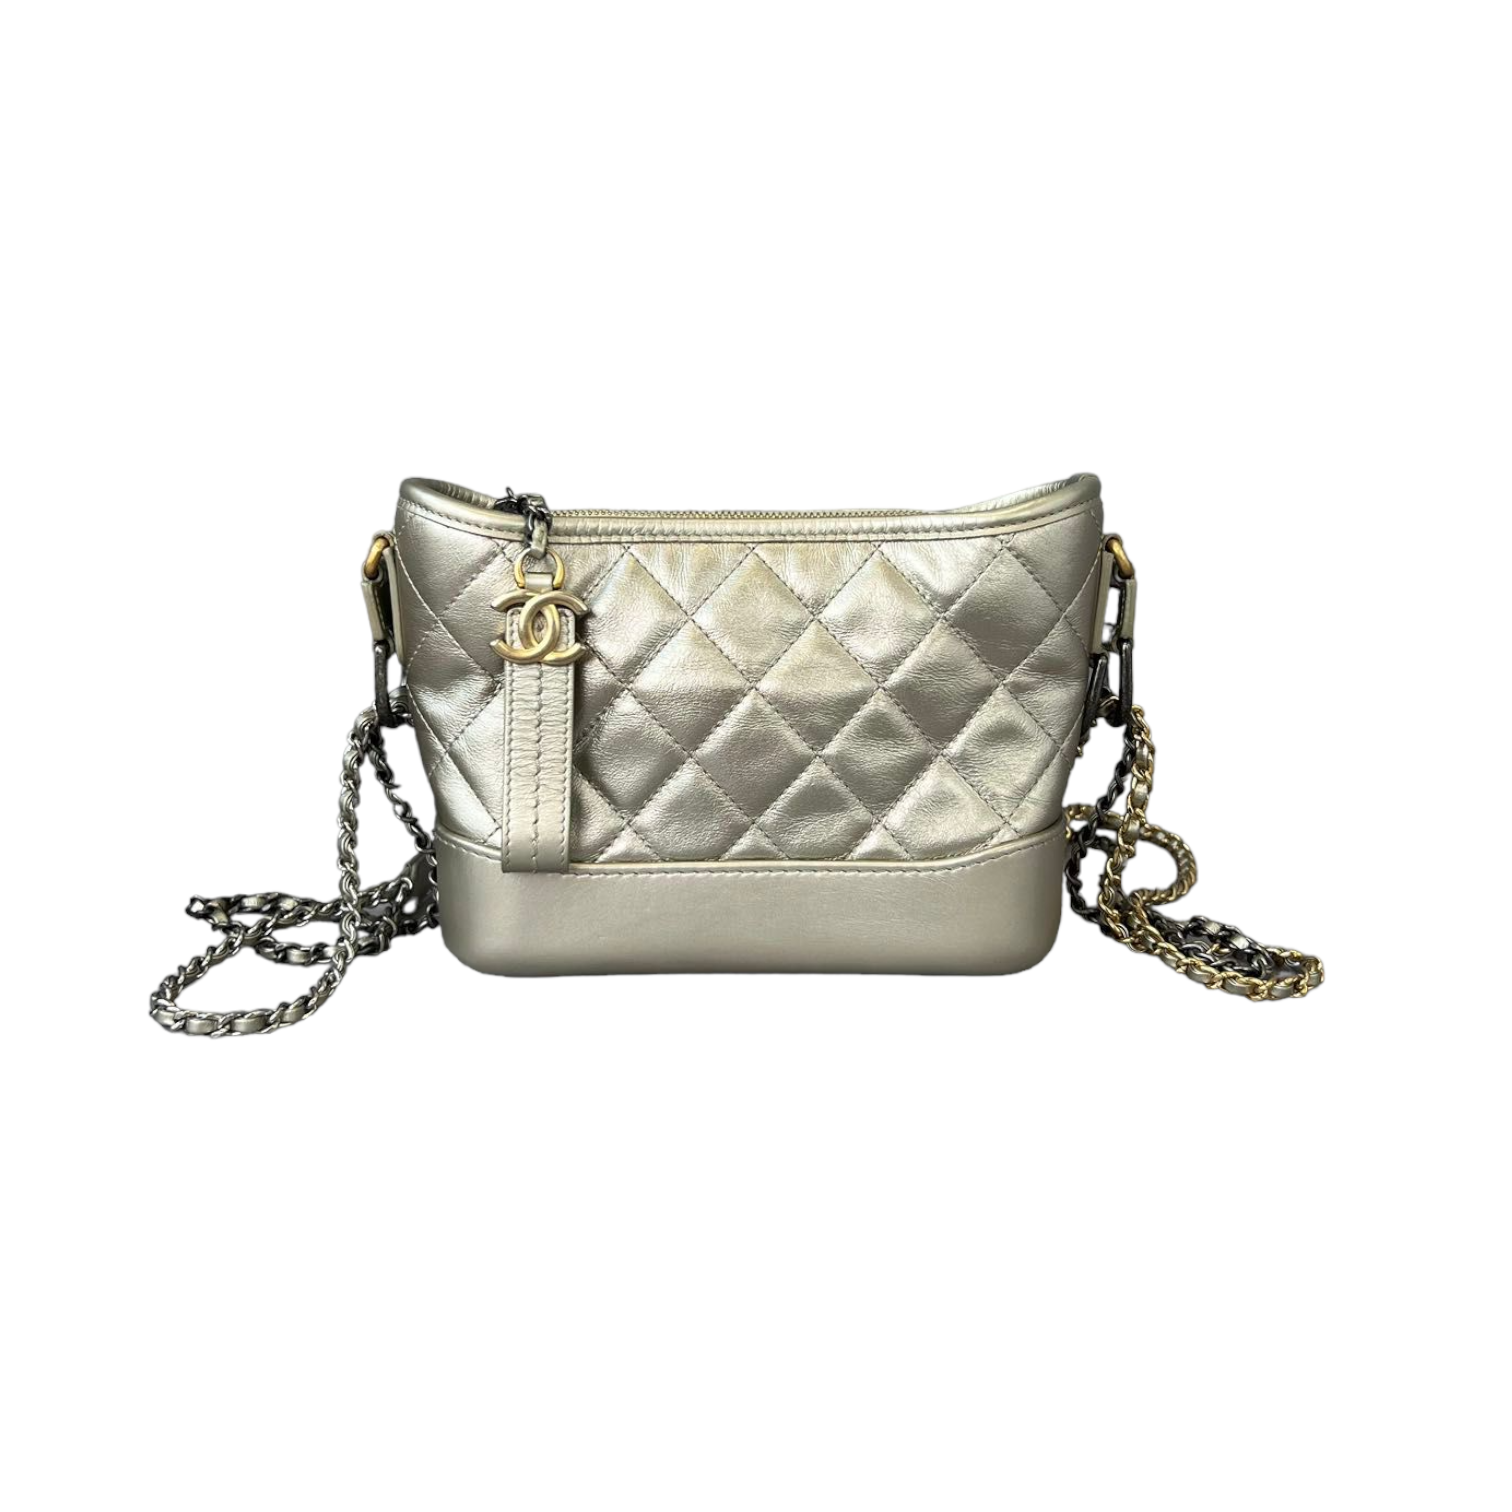 Chanel Gabrielle Hobo Bag Diamond Gabrielle Quilted Aged/Smooth